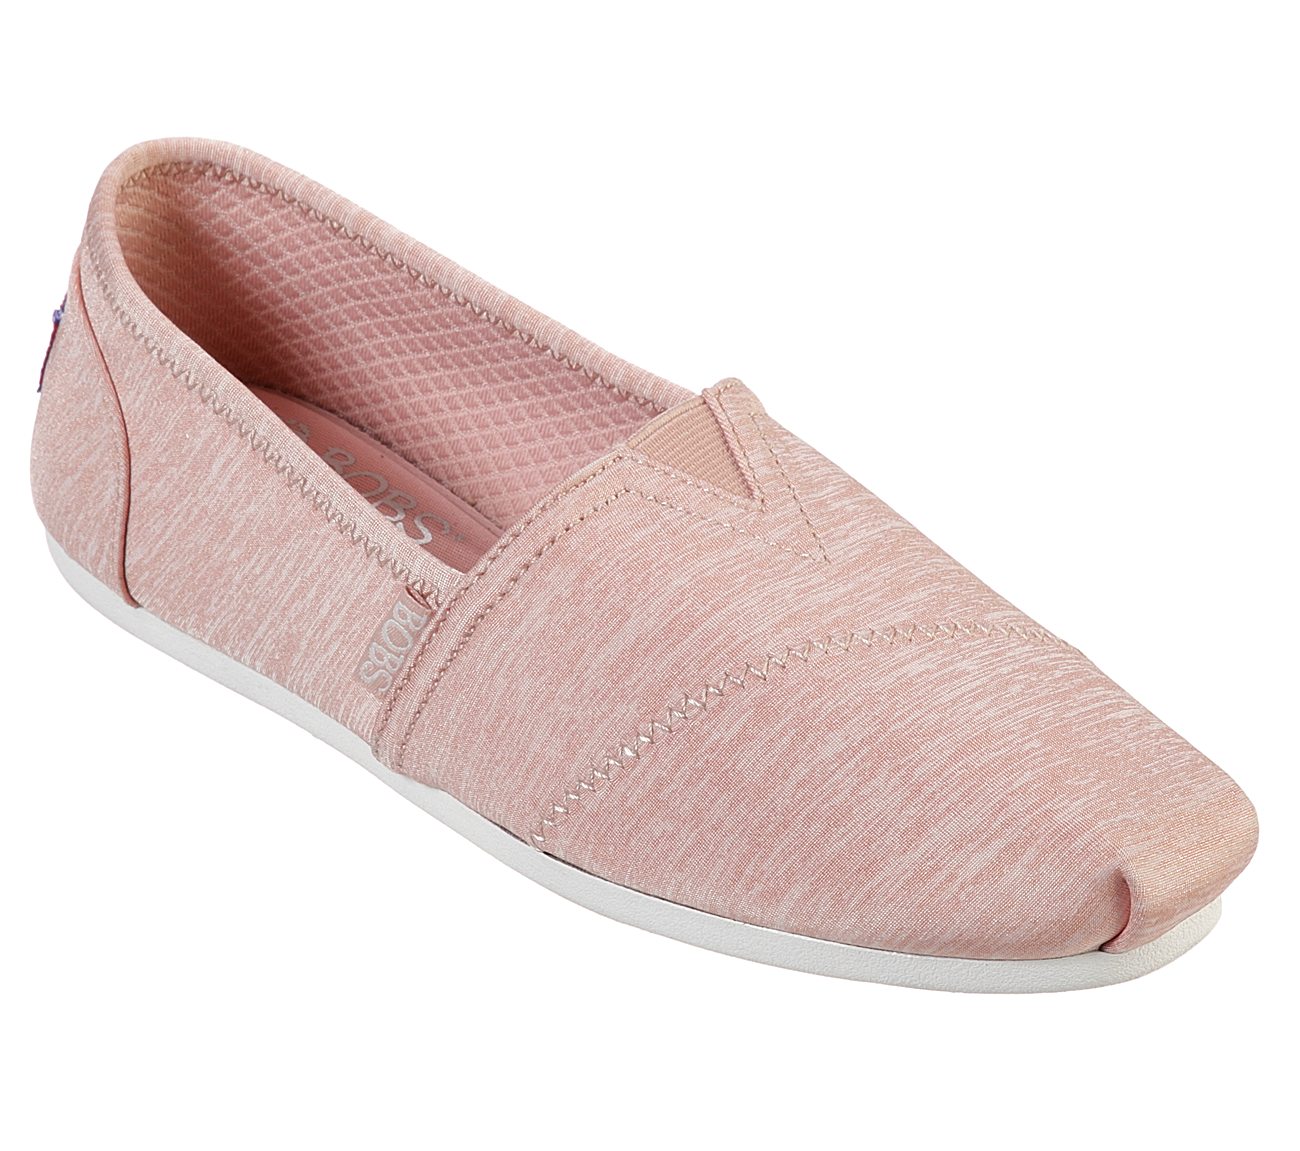 Buy SKECHERS BOBS Plush - Express Yourself BOBS Shoes only $35.00